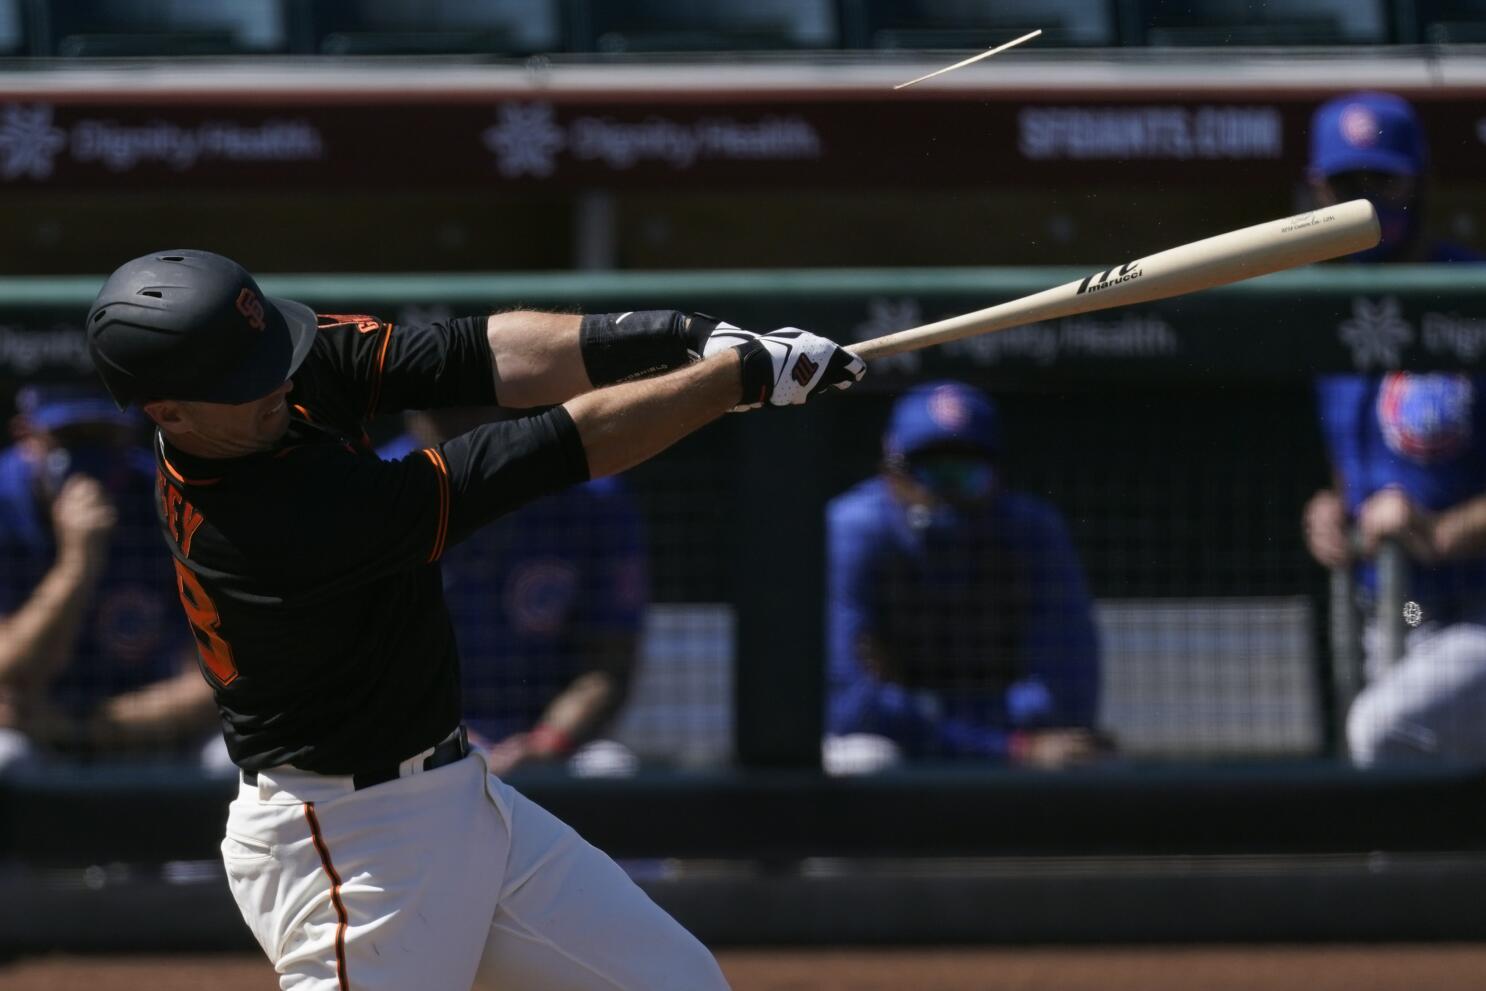 Giants' Buster Posey latest MLB star to opt out of 2020 season